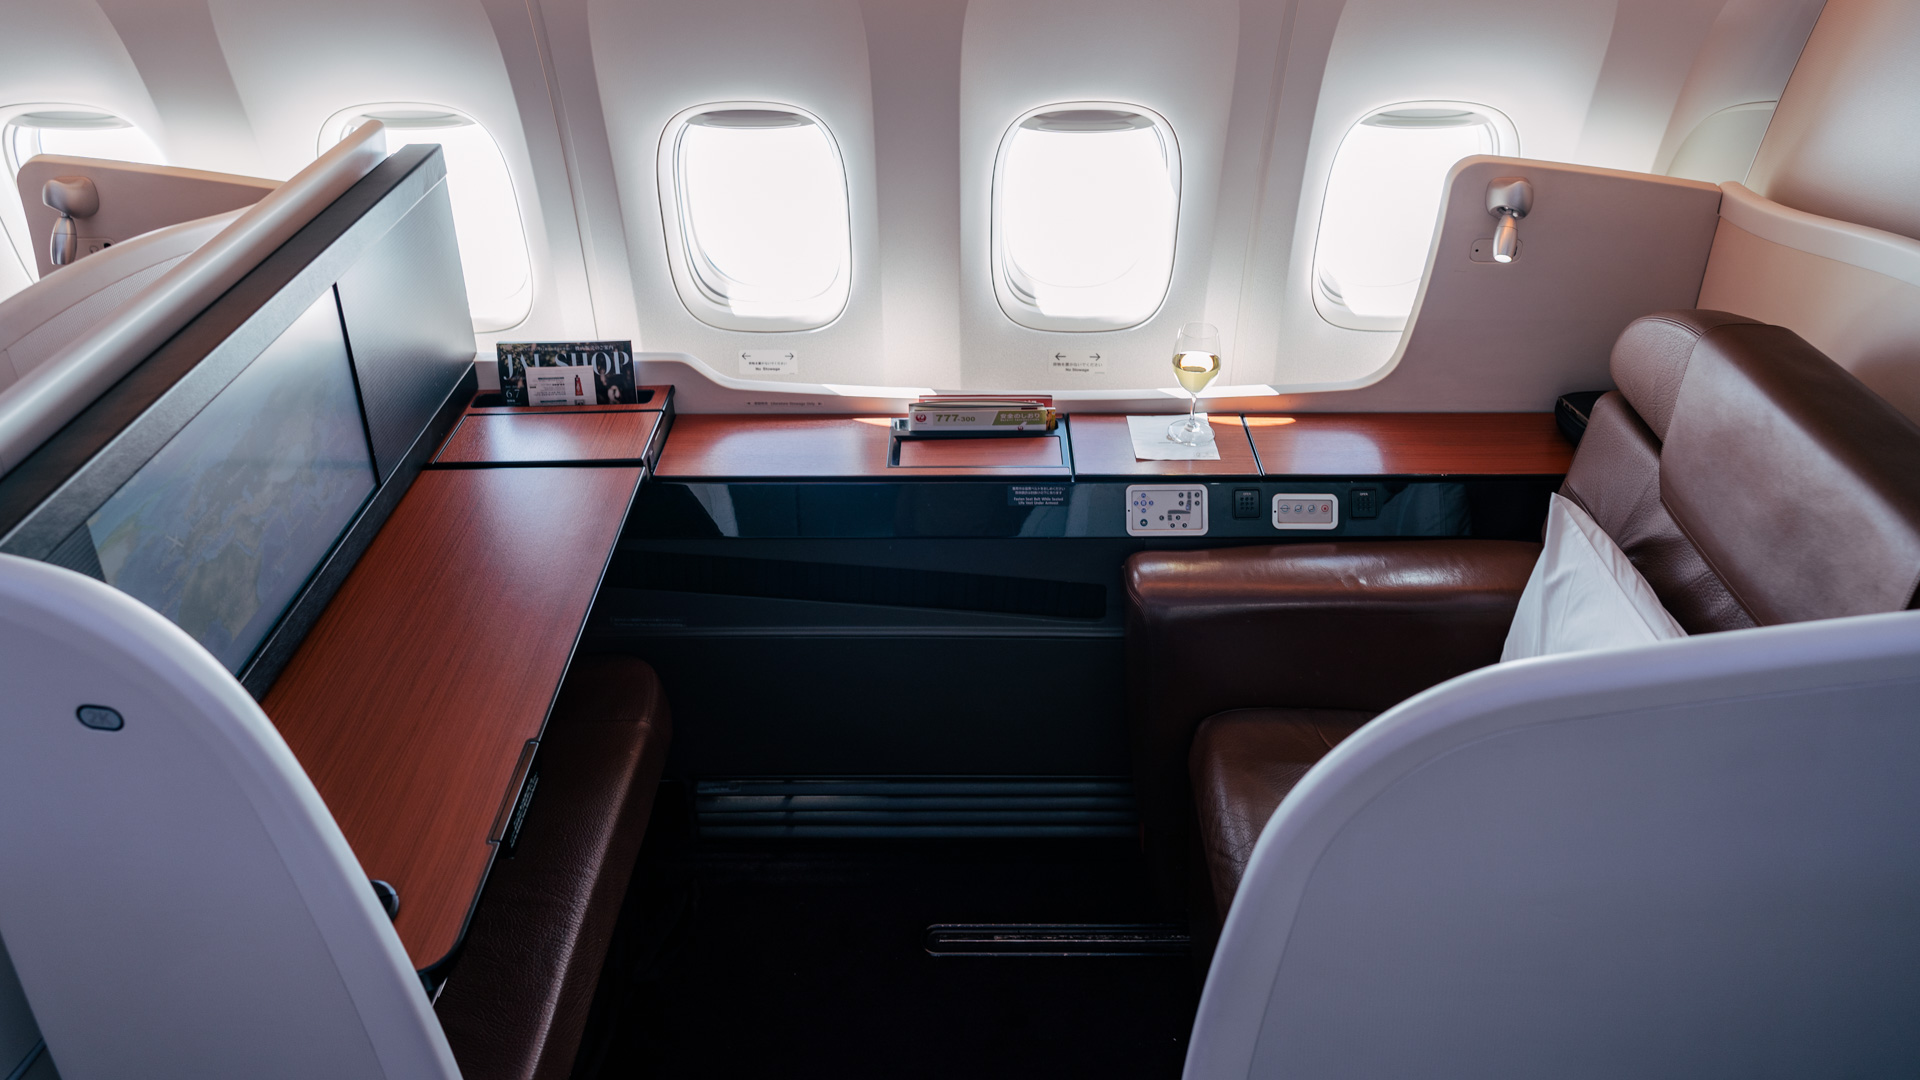 Japan Airlines Boeing 777 First Class length